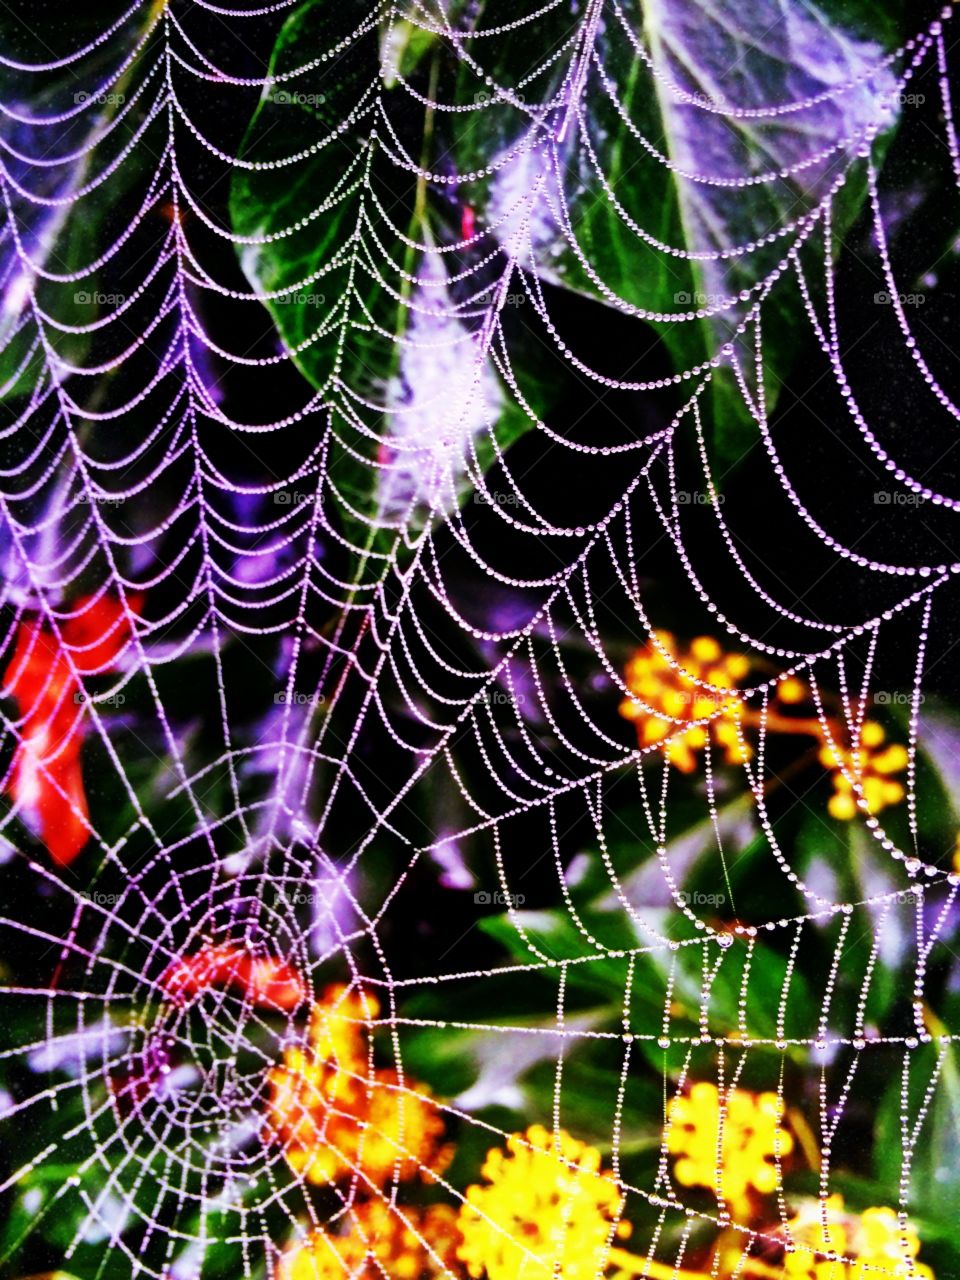 Spider web with dew droplets